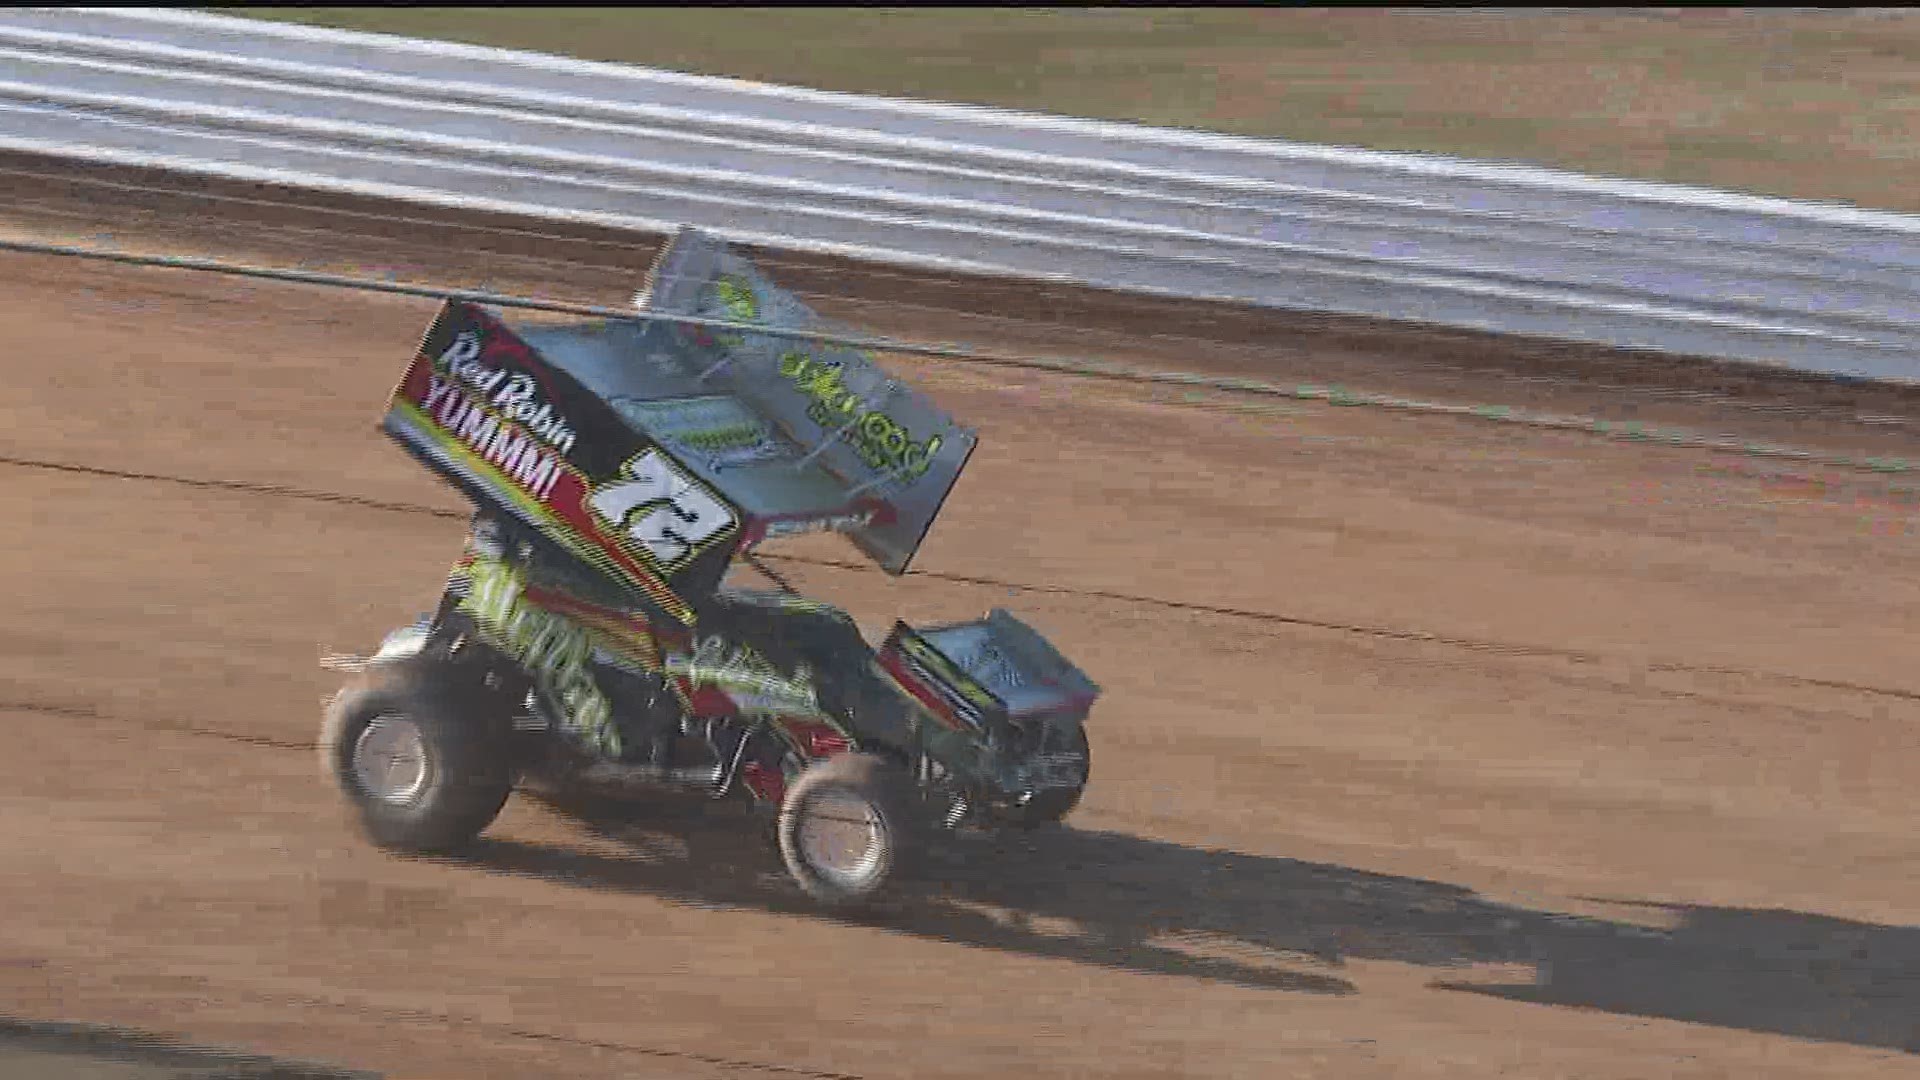 There was plenty of racing at the Fabulous Lincoln Speedway over the weekend.